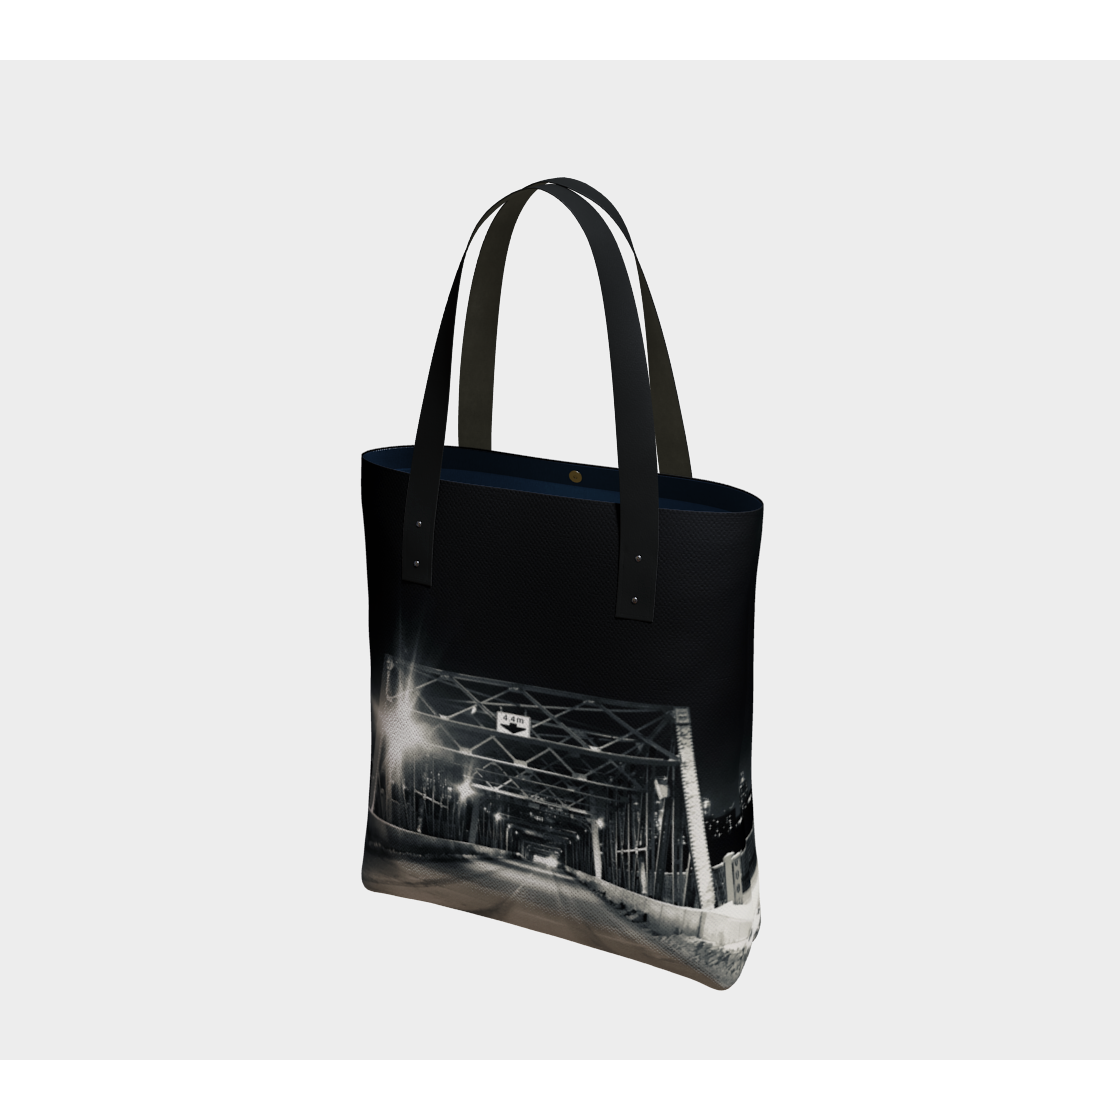 Tote Bag for Women with: Bridge at Night Design, Front